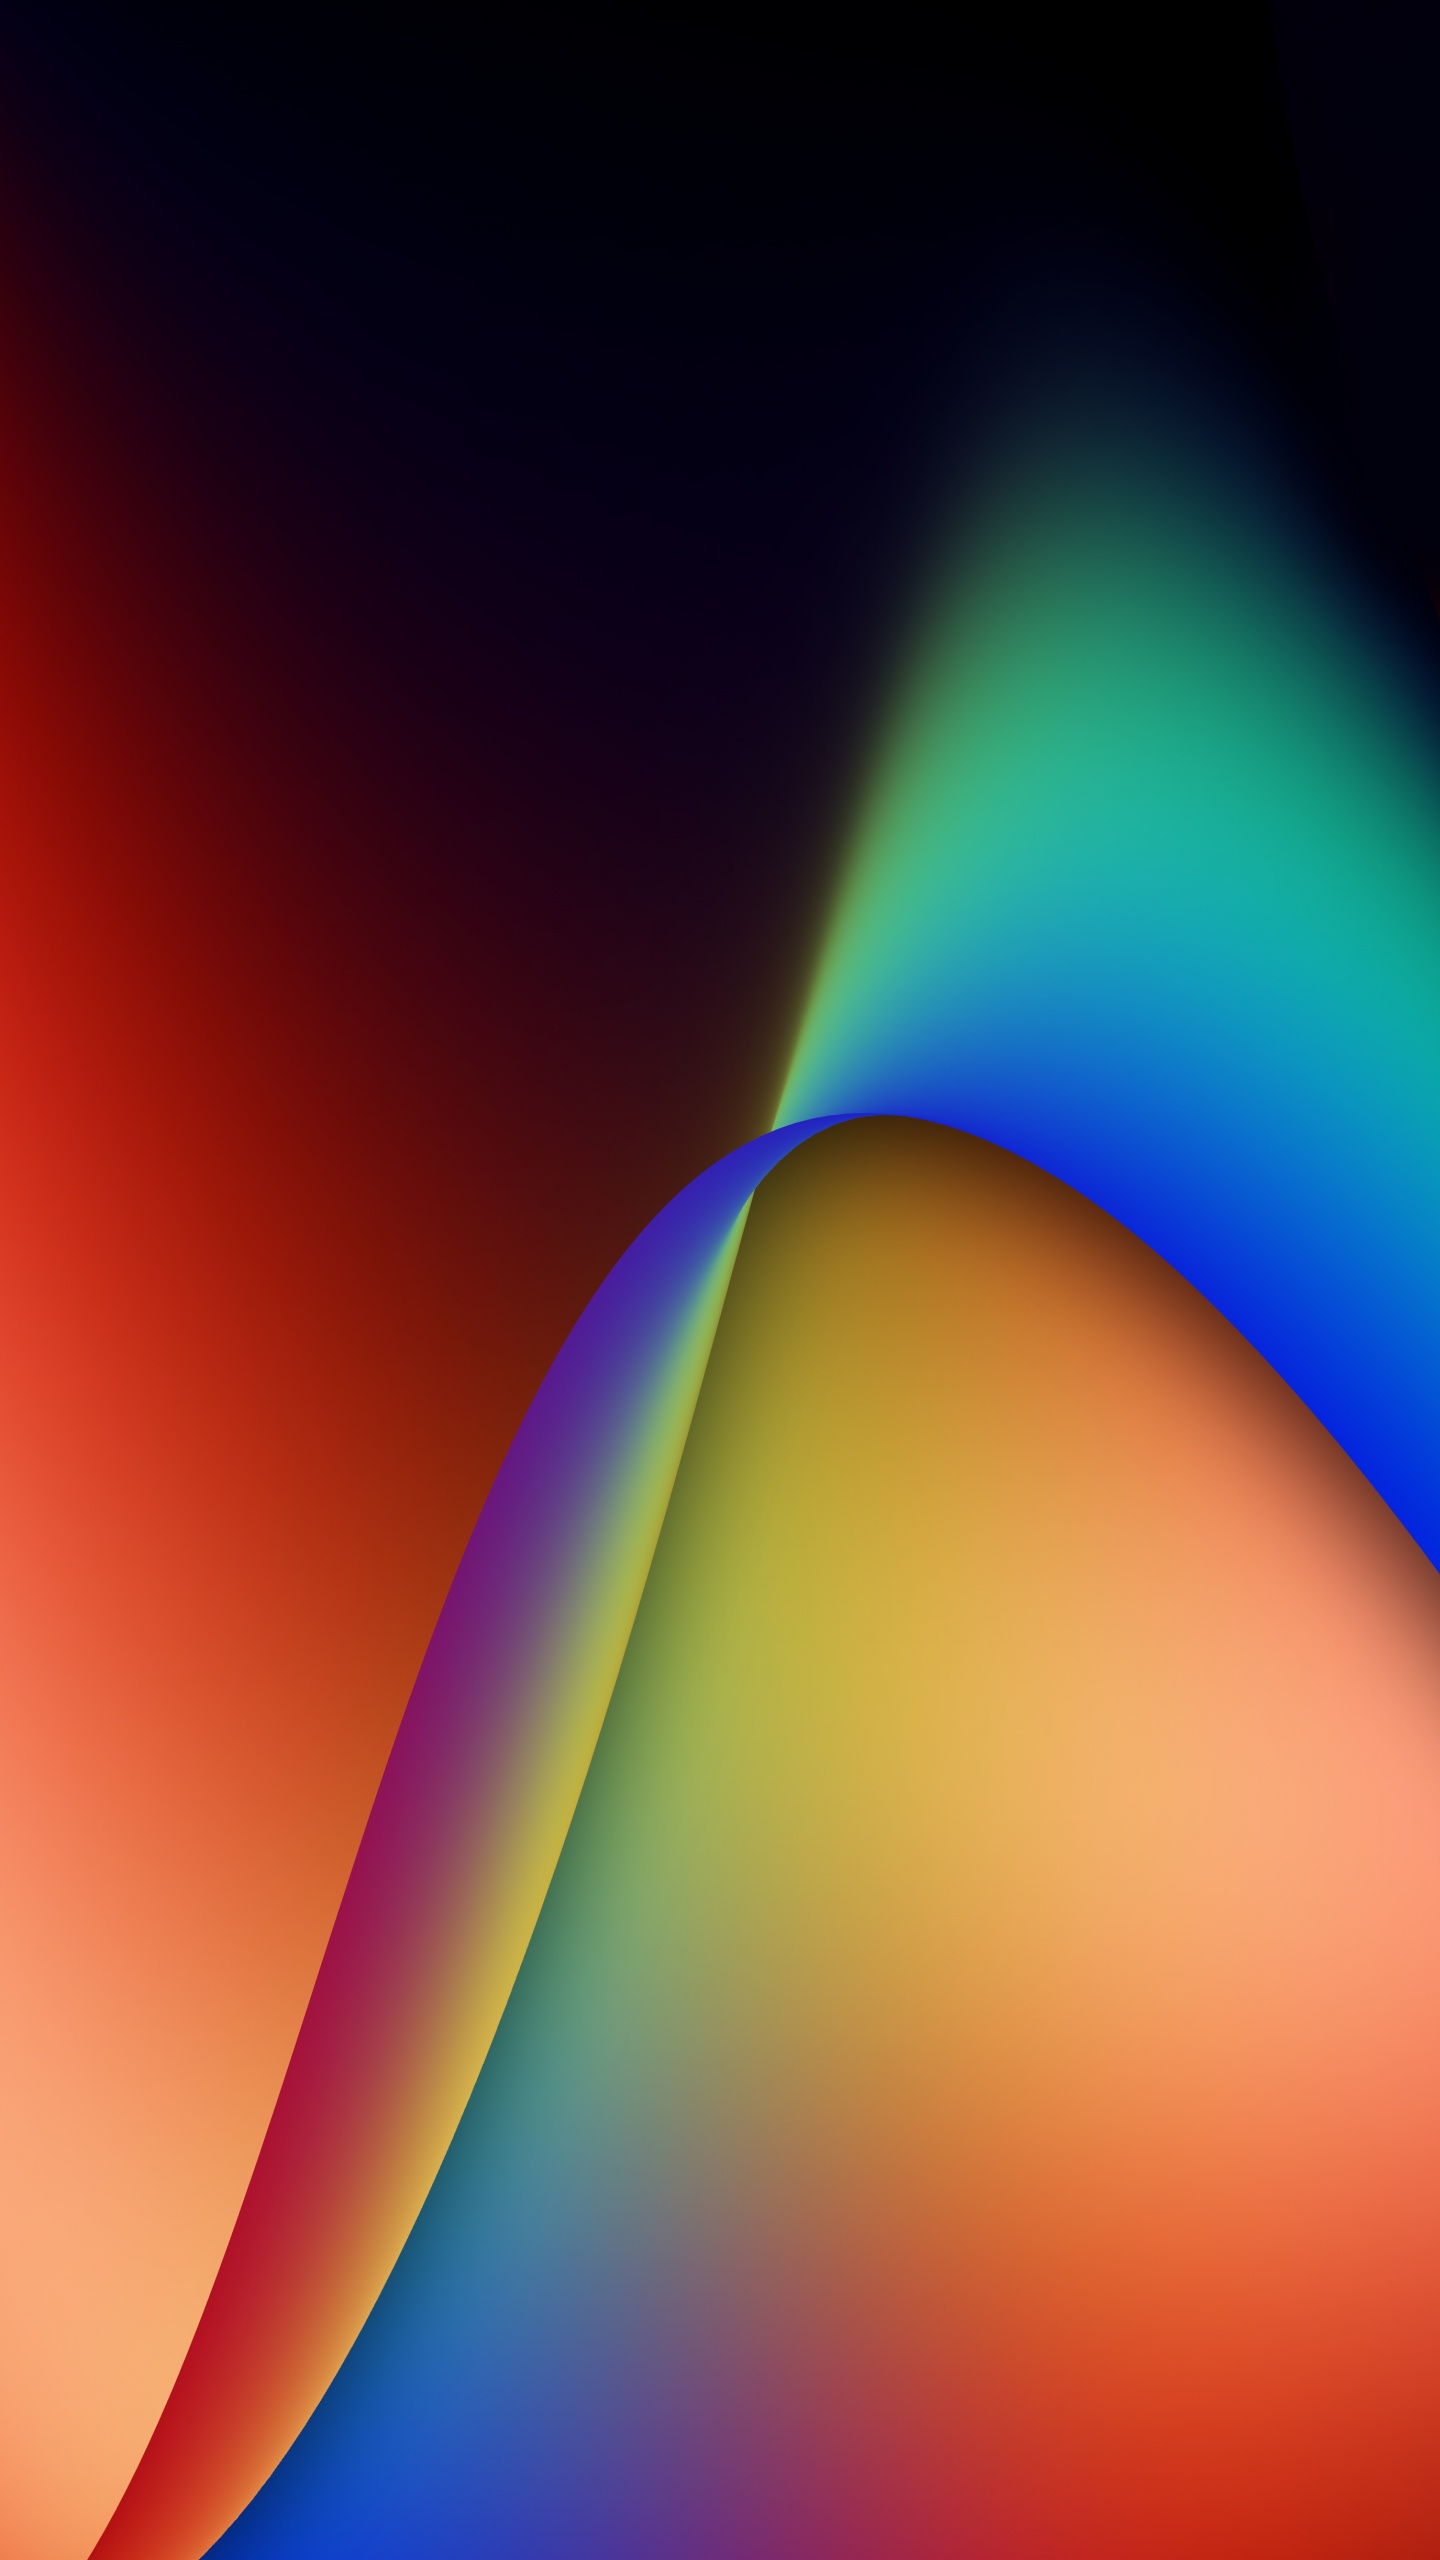 Light, Science, Physics, Colorfulness, Electric Blue. Wallpaper in 1440x2560 Resolution